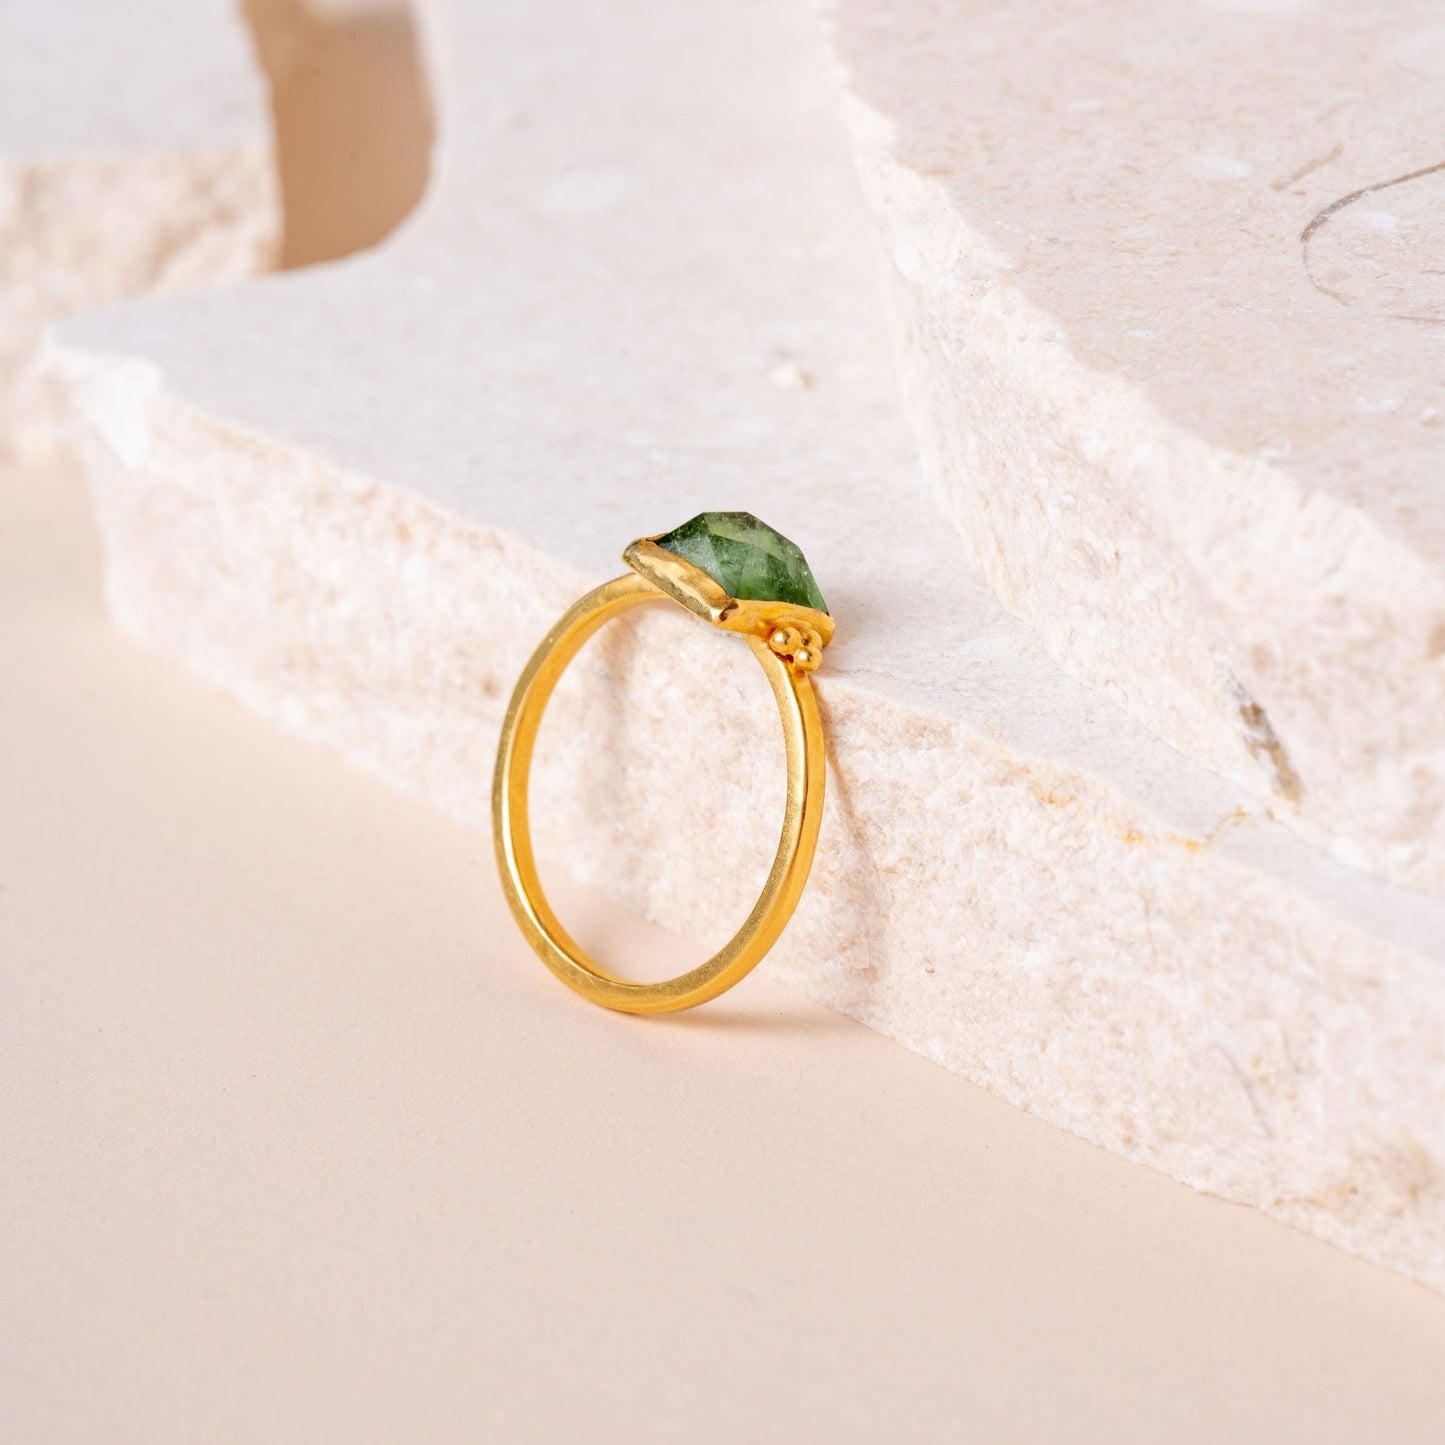 A timeless gold ring, meticulously crafted with granulation details, showcasing a beautiful green rose-cut square tourmaline.